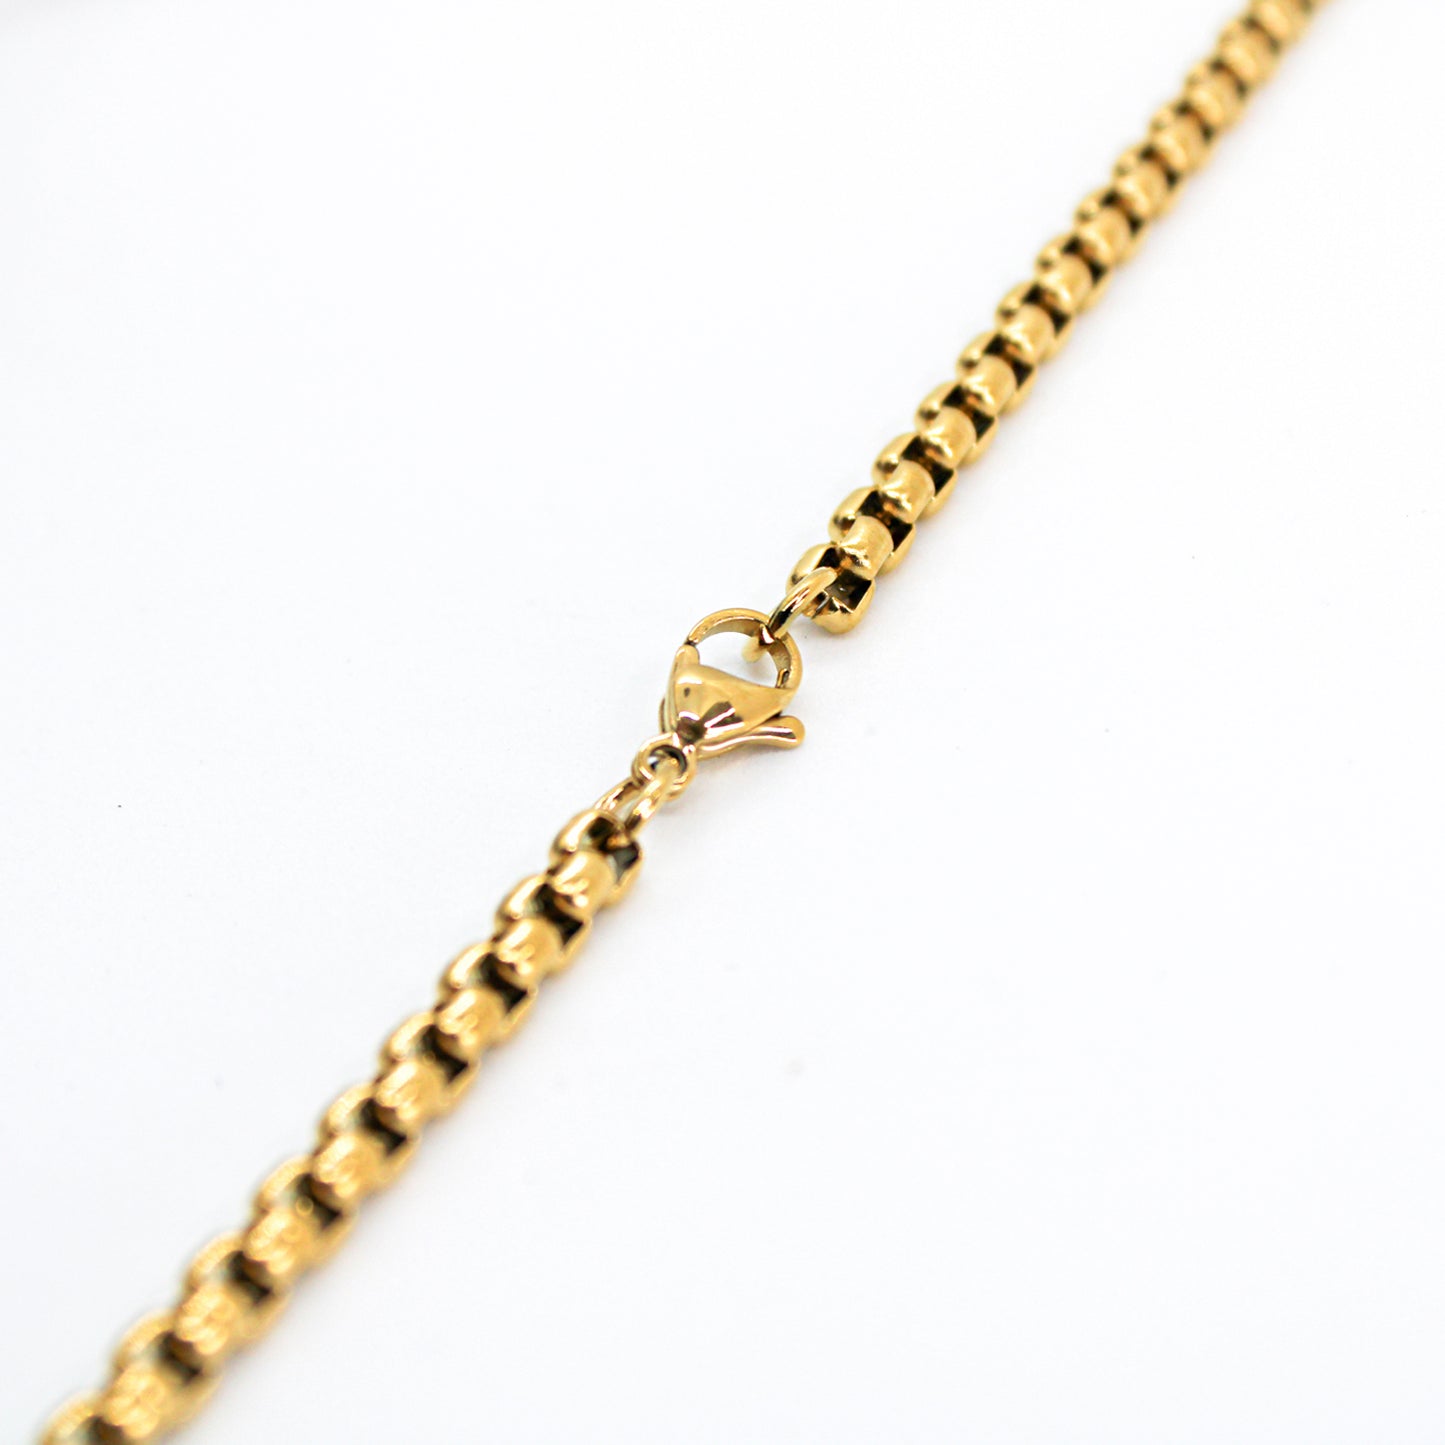 Tiger Gold Stainless Steel Pendant Necklace For Men